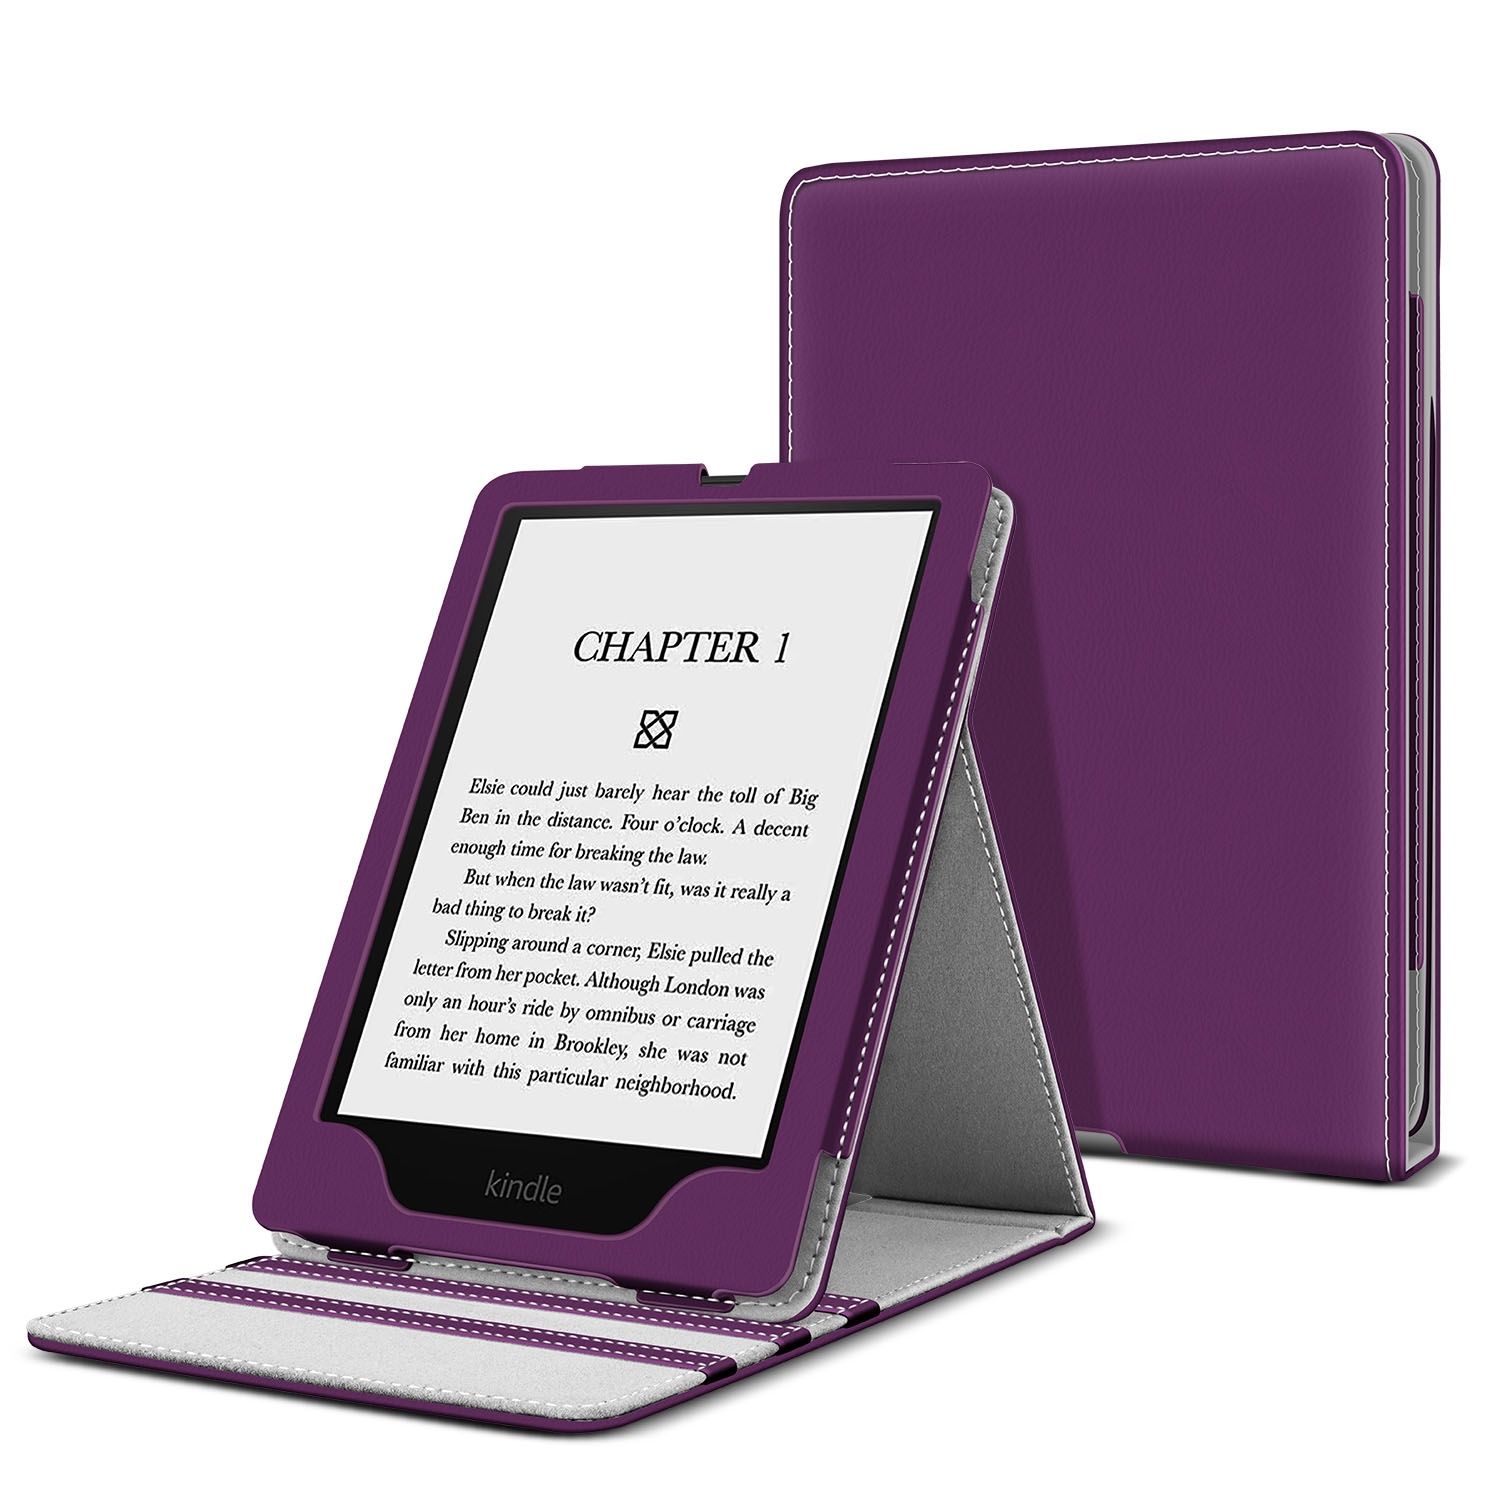 Case Covers for Kindle Paperwhite Cover 11th Generation-2021 / Signature Edition 6.8 Inch eReader with Foldable Stand, Vertical Flip Origami Paper White Cover, Premium PU Leather, Purple